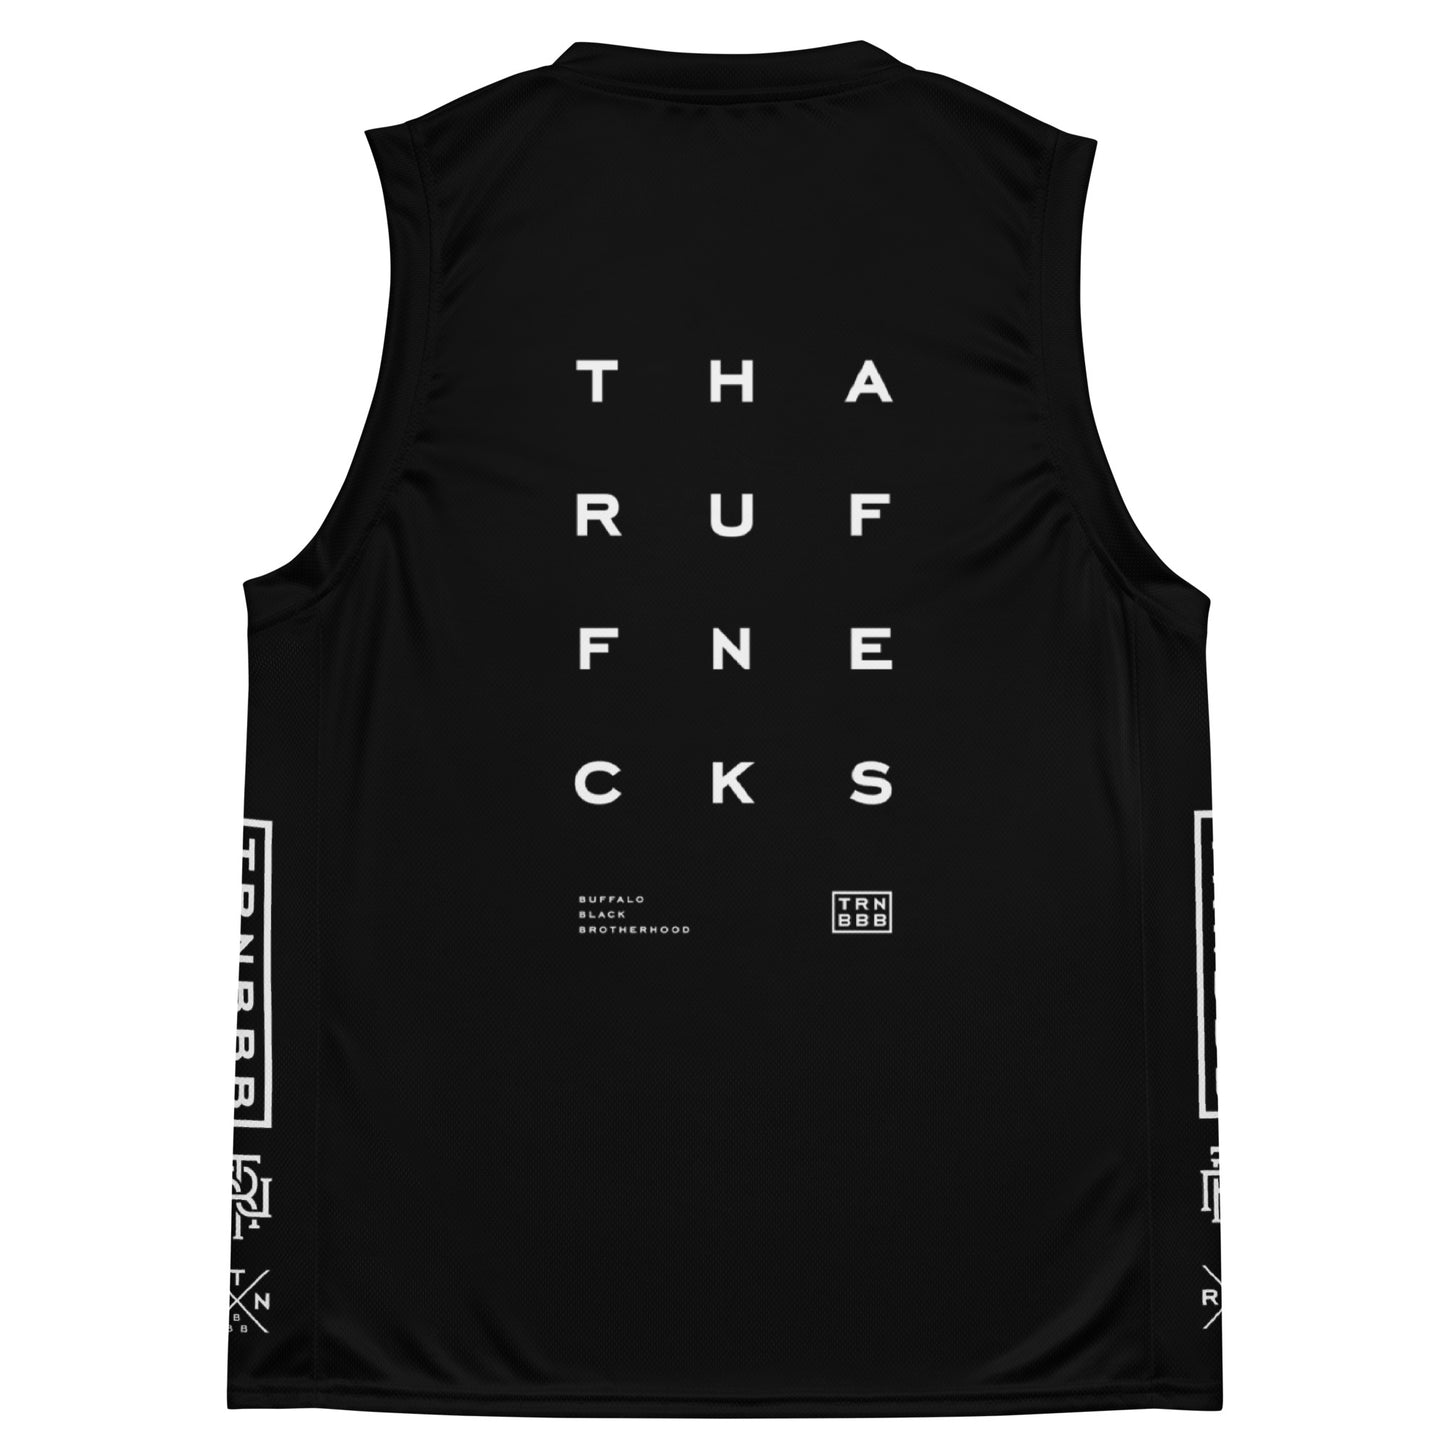 STACKED TRNBBB Recycled unisex basketball jersey